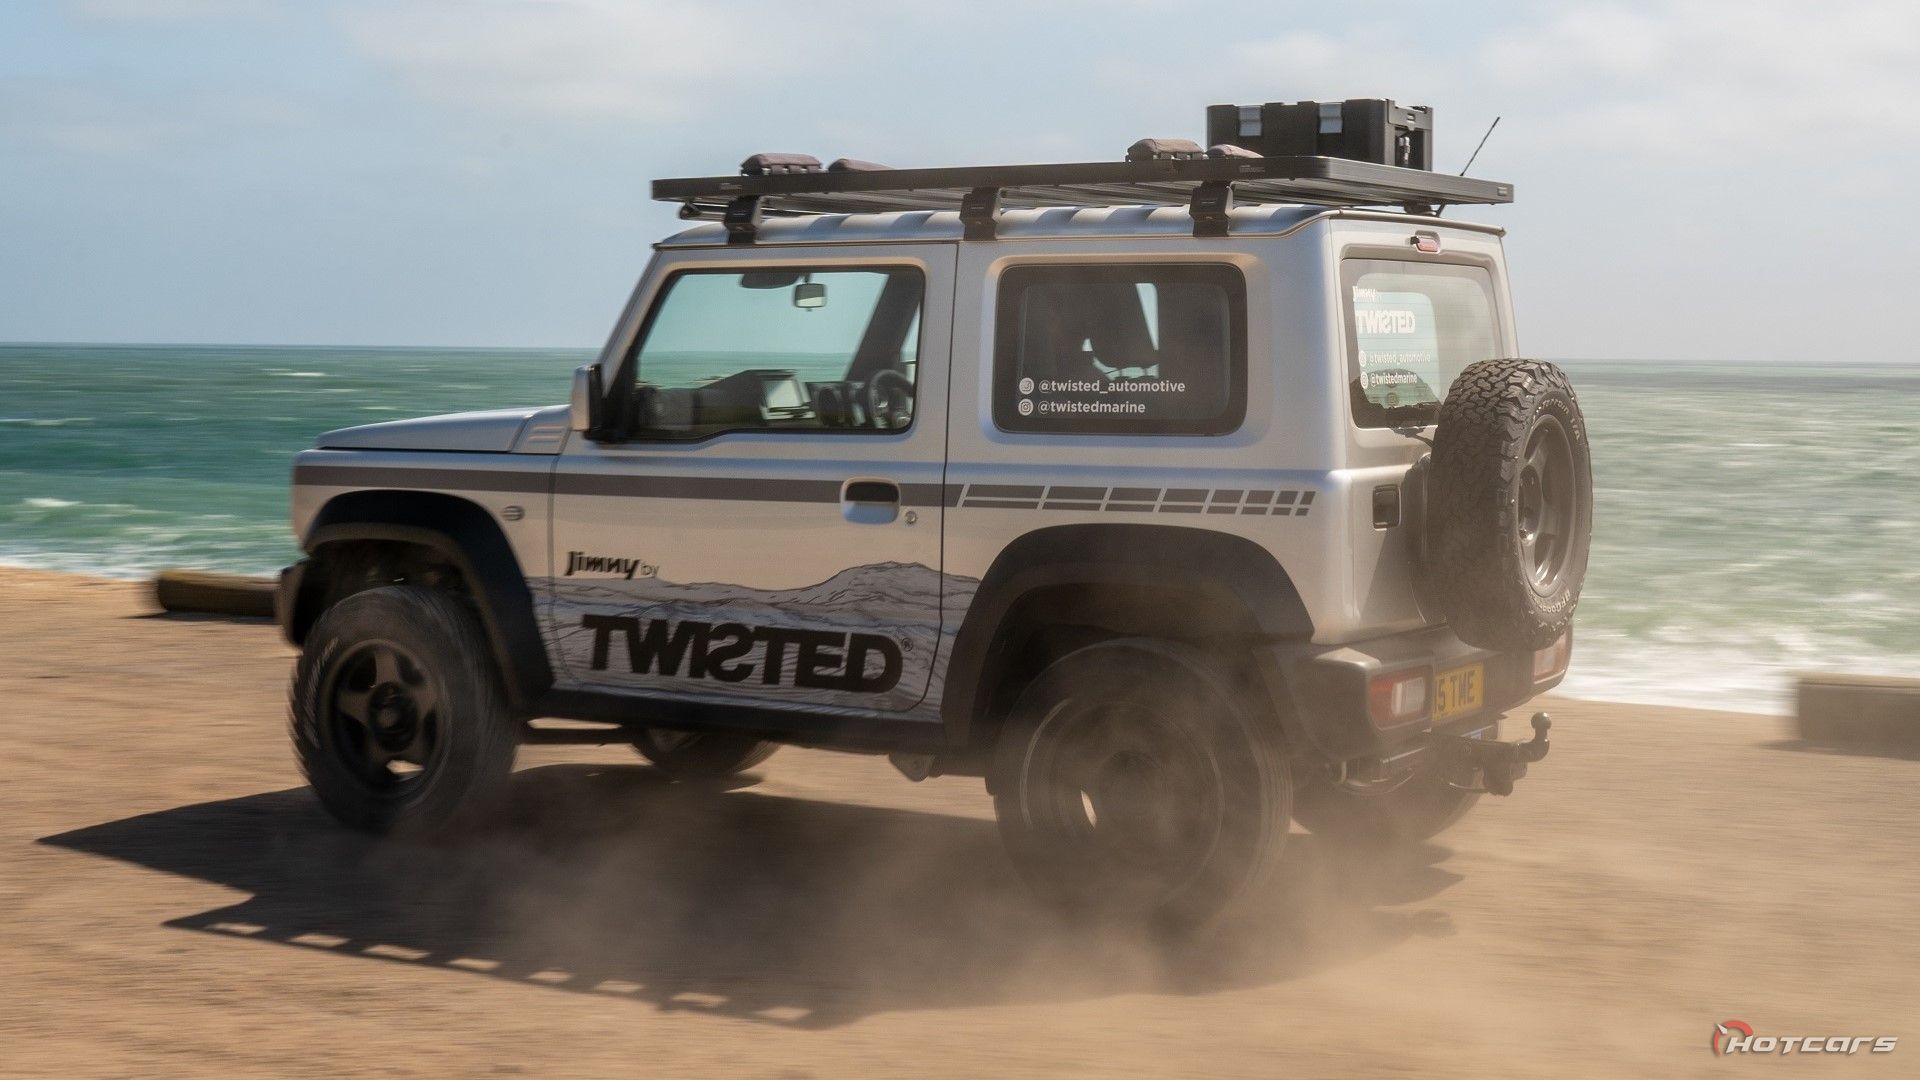 TWISTED AUTOMOTIVE ADDS SUZUKI JIMNY TO ITS PRODUCT OFFERING.